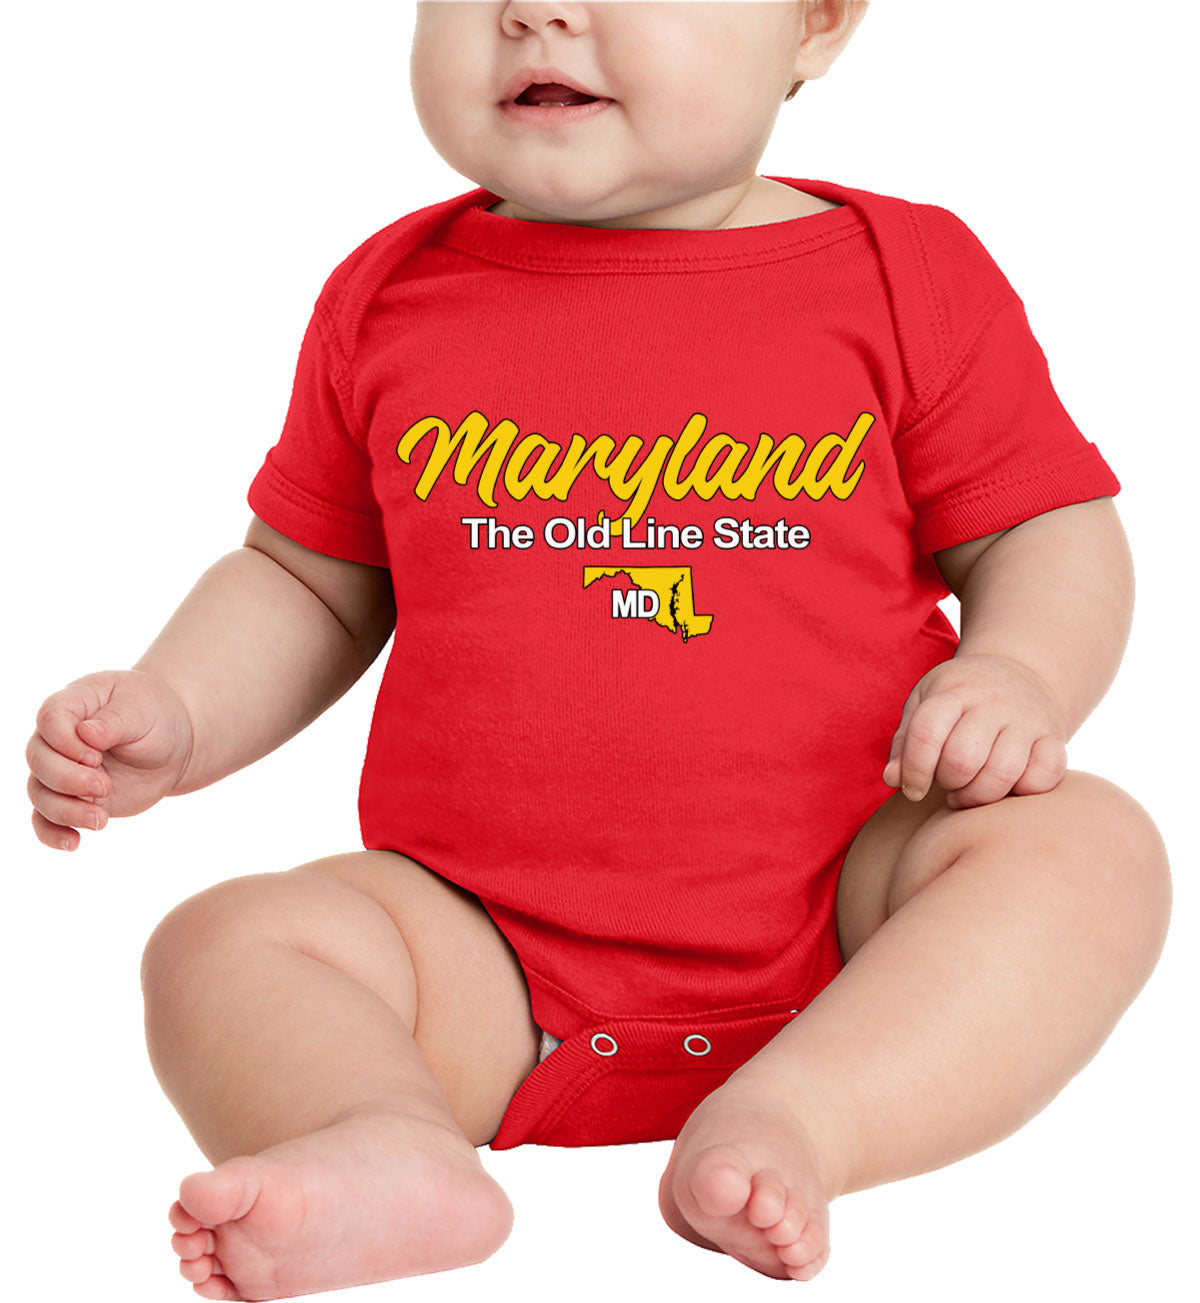 Maryland The Old Line State Baby Onesie